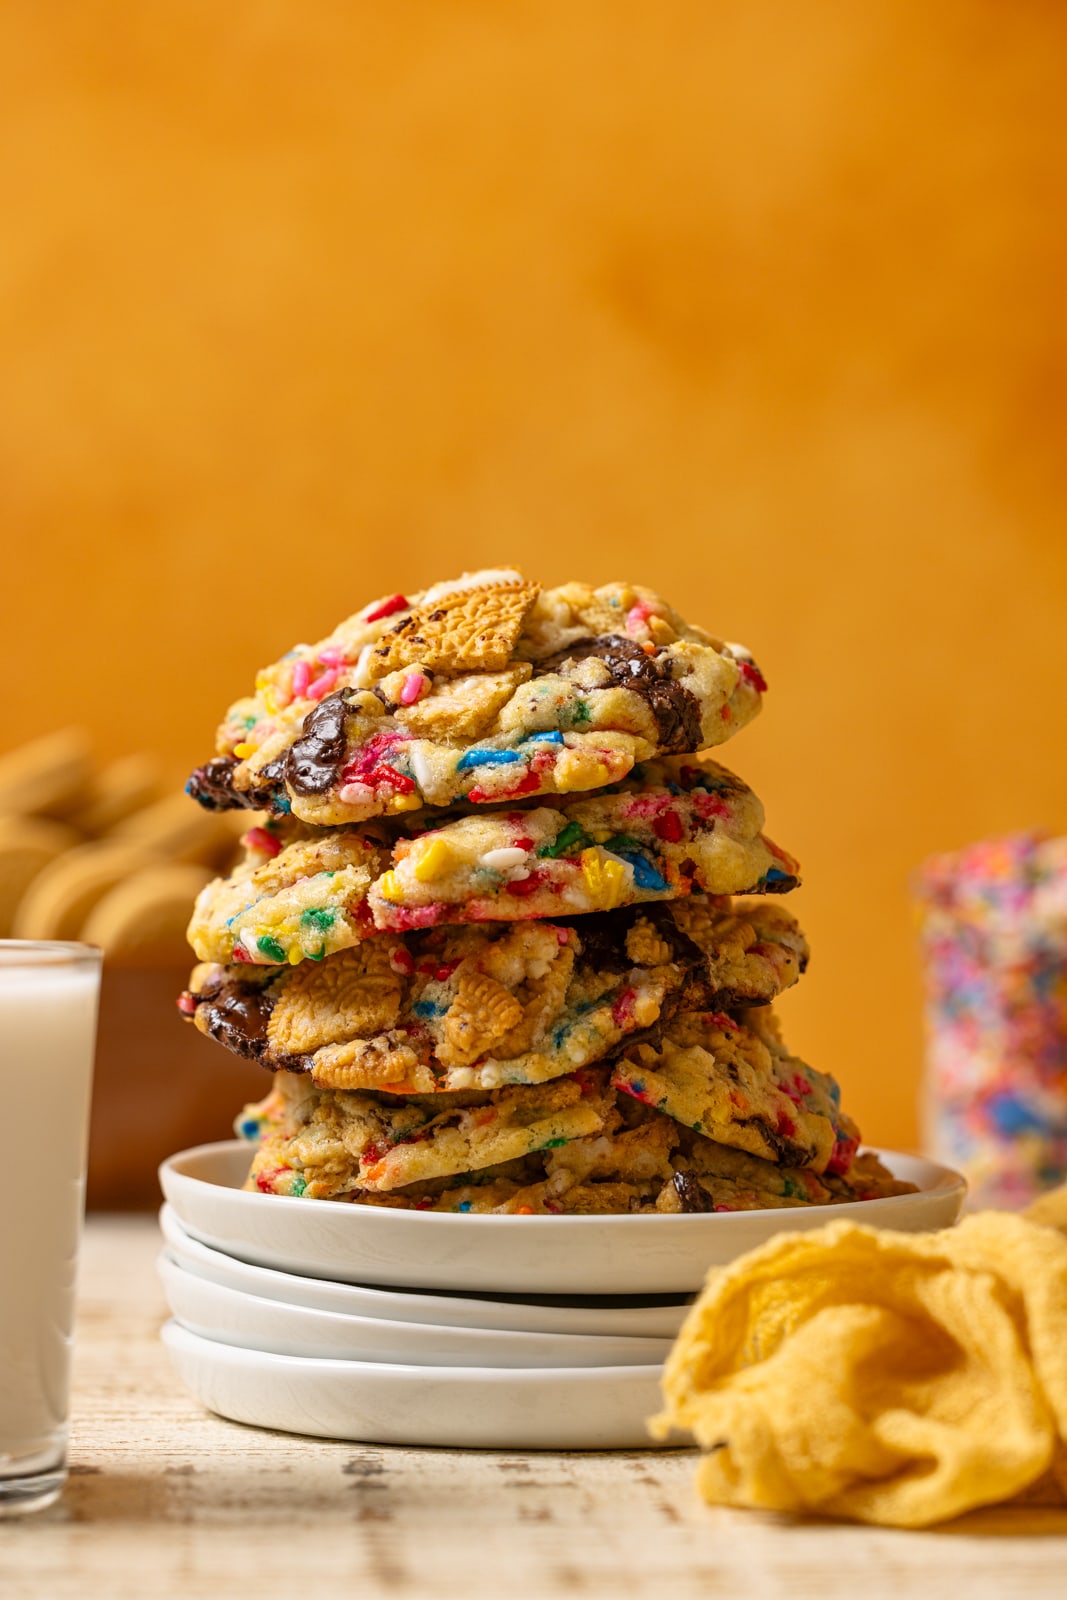 Stacked cookies on a white plates with a glass of milk and yellow napkin.